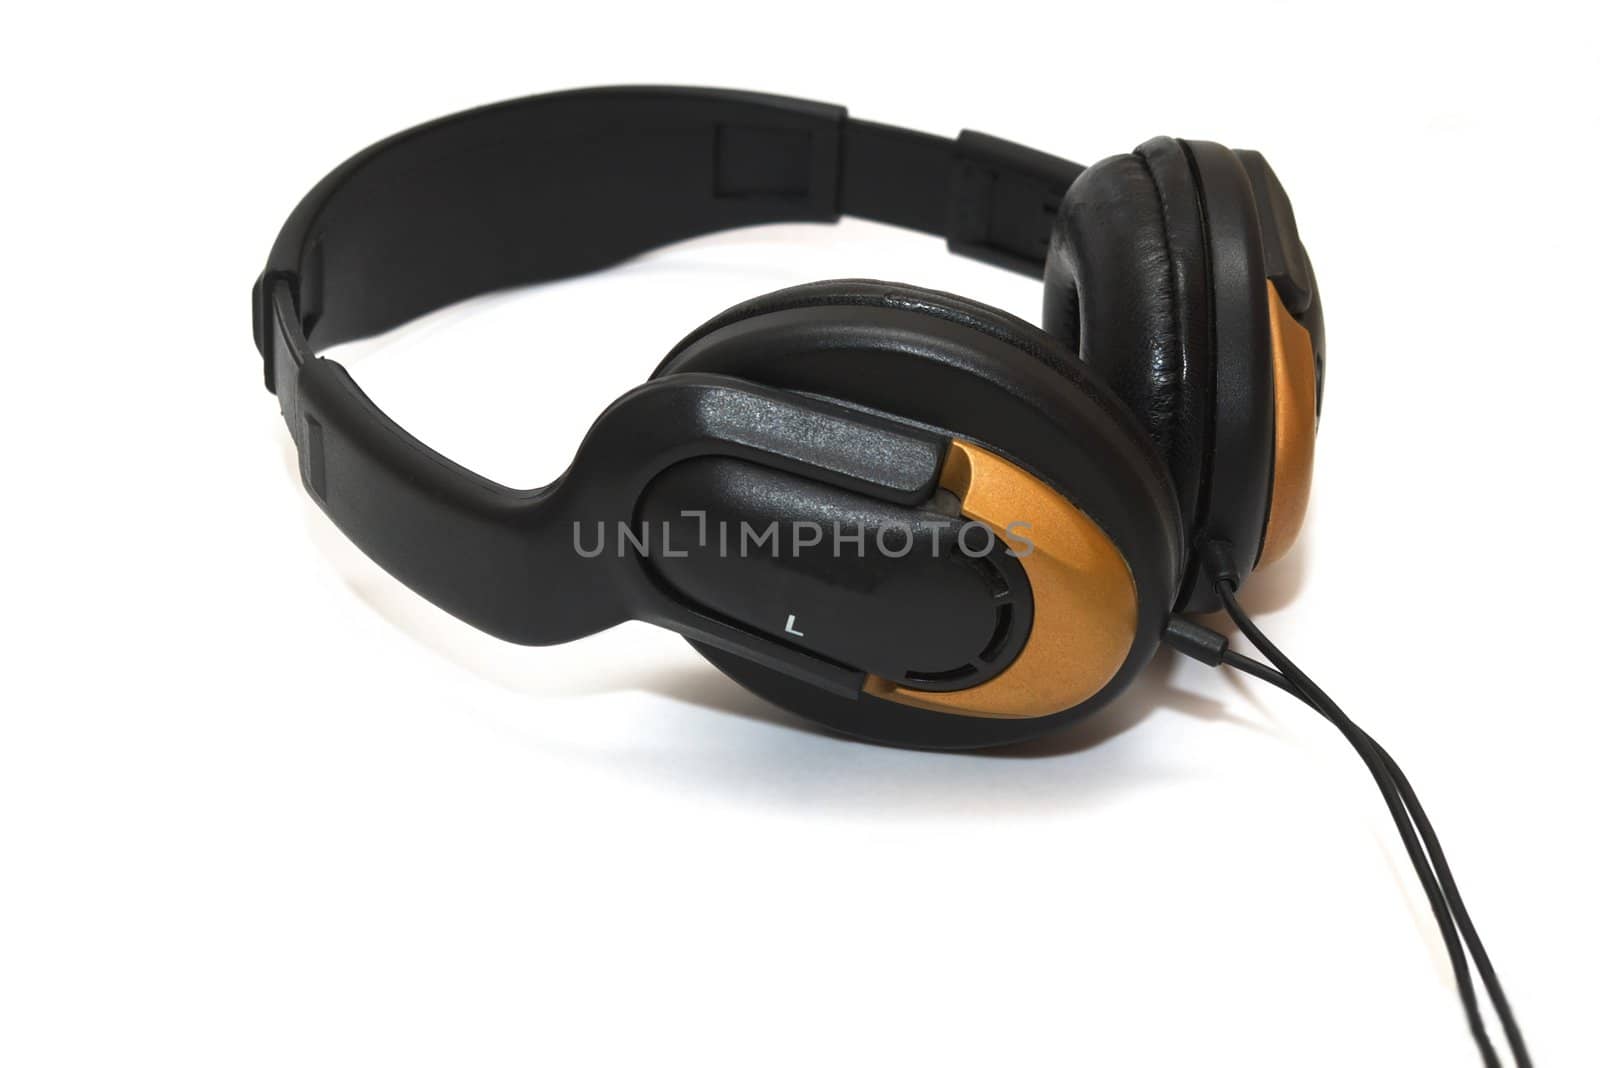 photo of the headphones on white background